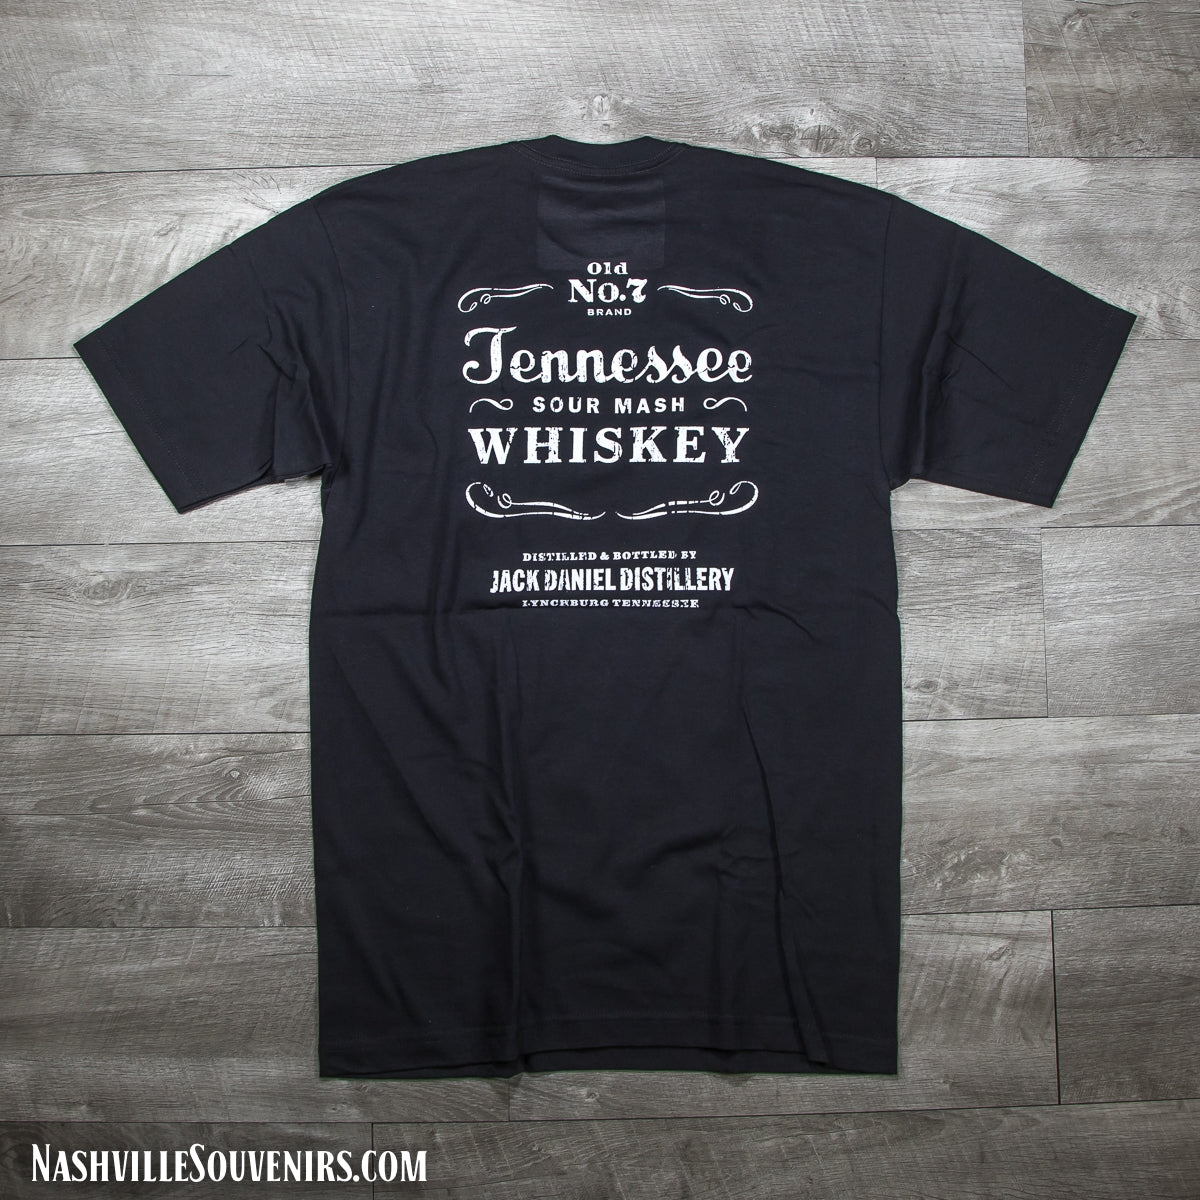 Officially licensed Jack Daniels Tennessee Sour Mash Whiskey T-Shirt with small front logo and large rear logo. Get yours today with FREE SHIPPING on all US orders over $75!